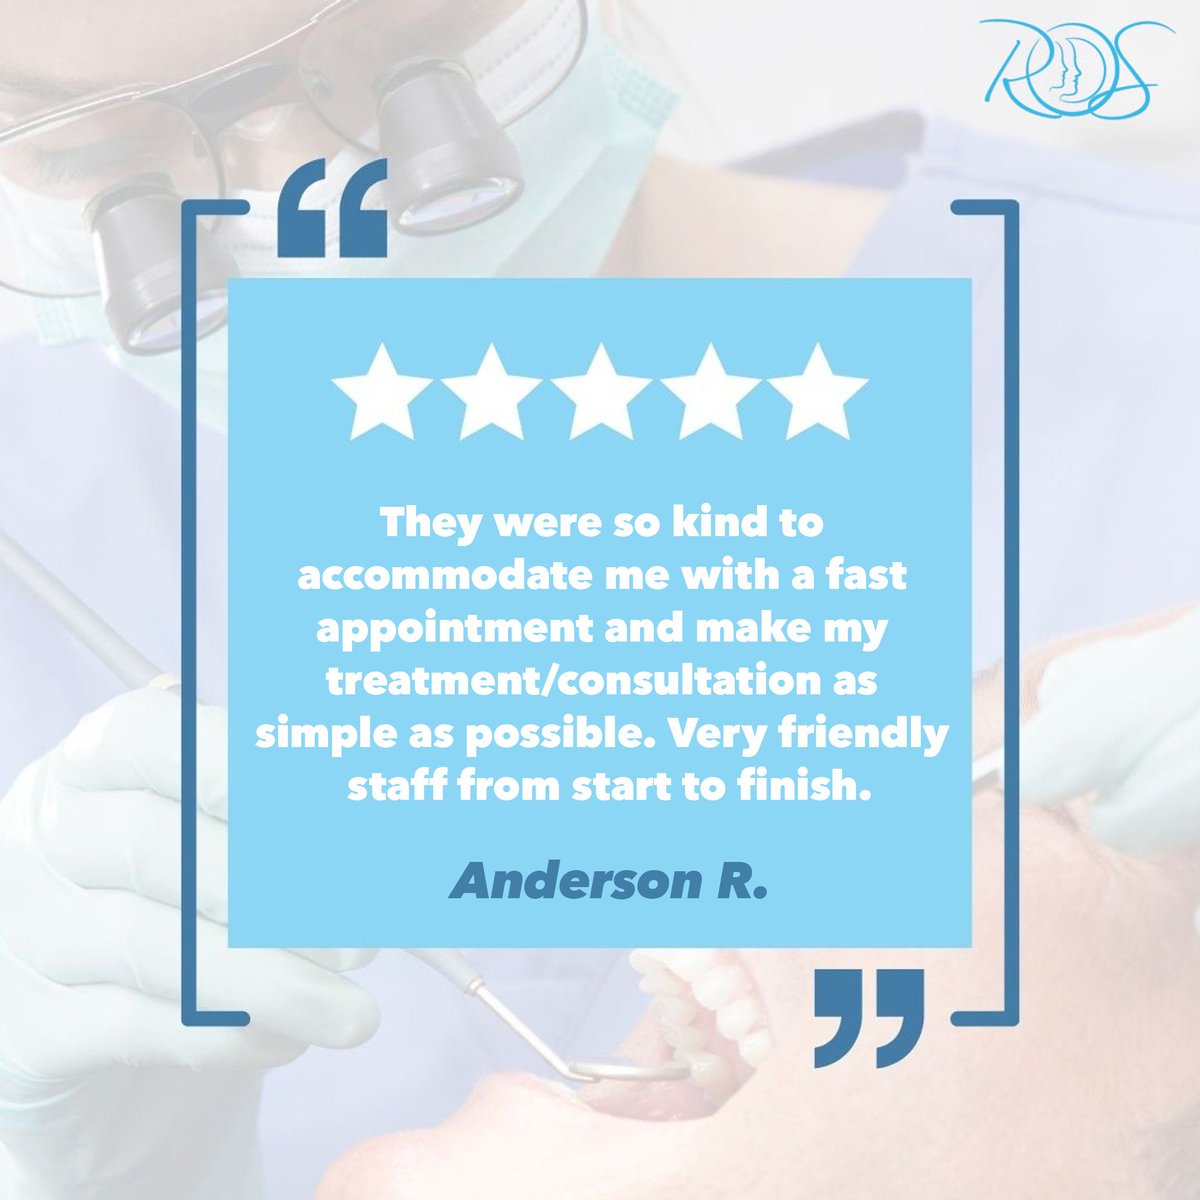 Thank you for the excellent review, Anderson! We are happy to hear that your overall experience with Randolph Oral Surgery has been a positive one. We go to great lengths to provide the highest level of patient care and strive for excellence!